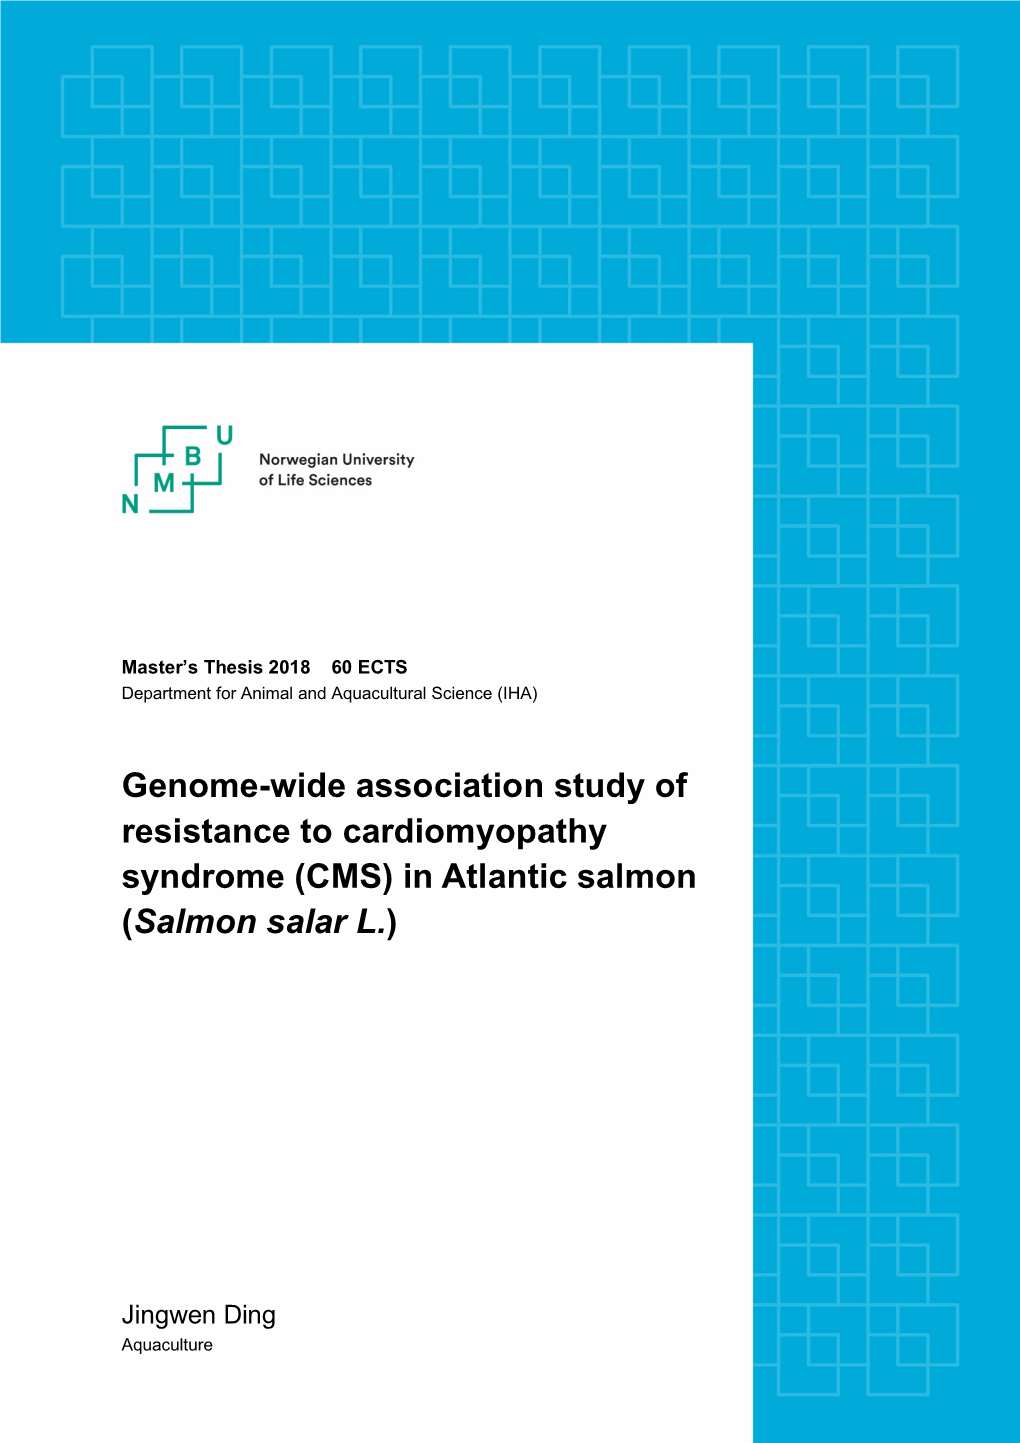 Genome-Wide Association Study of Resistance to Cardiomyopathy Syndrome (CMS) in Atlantic Salmon